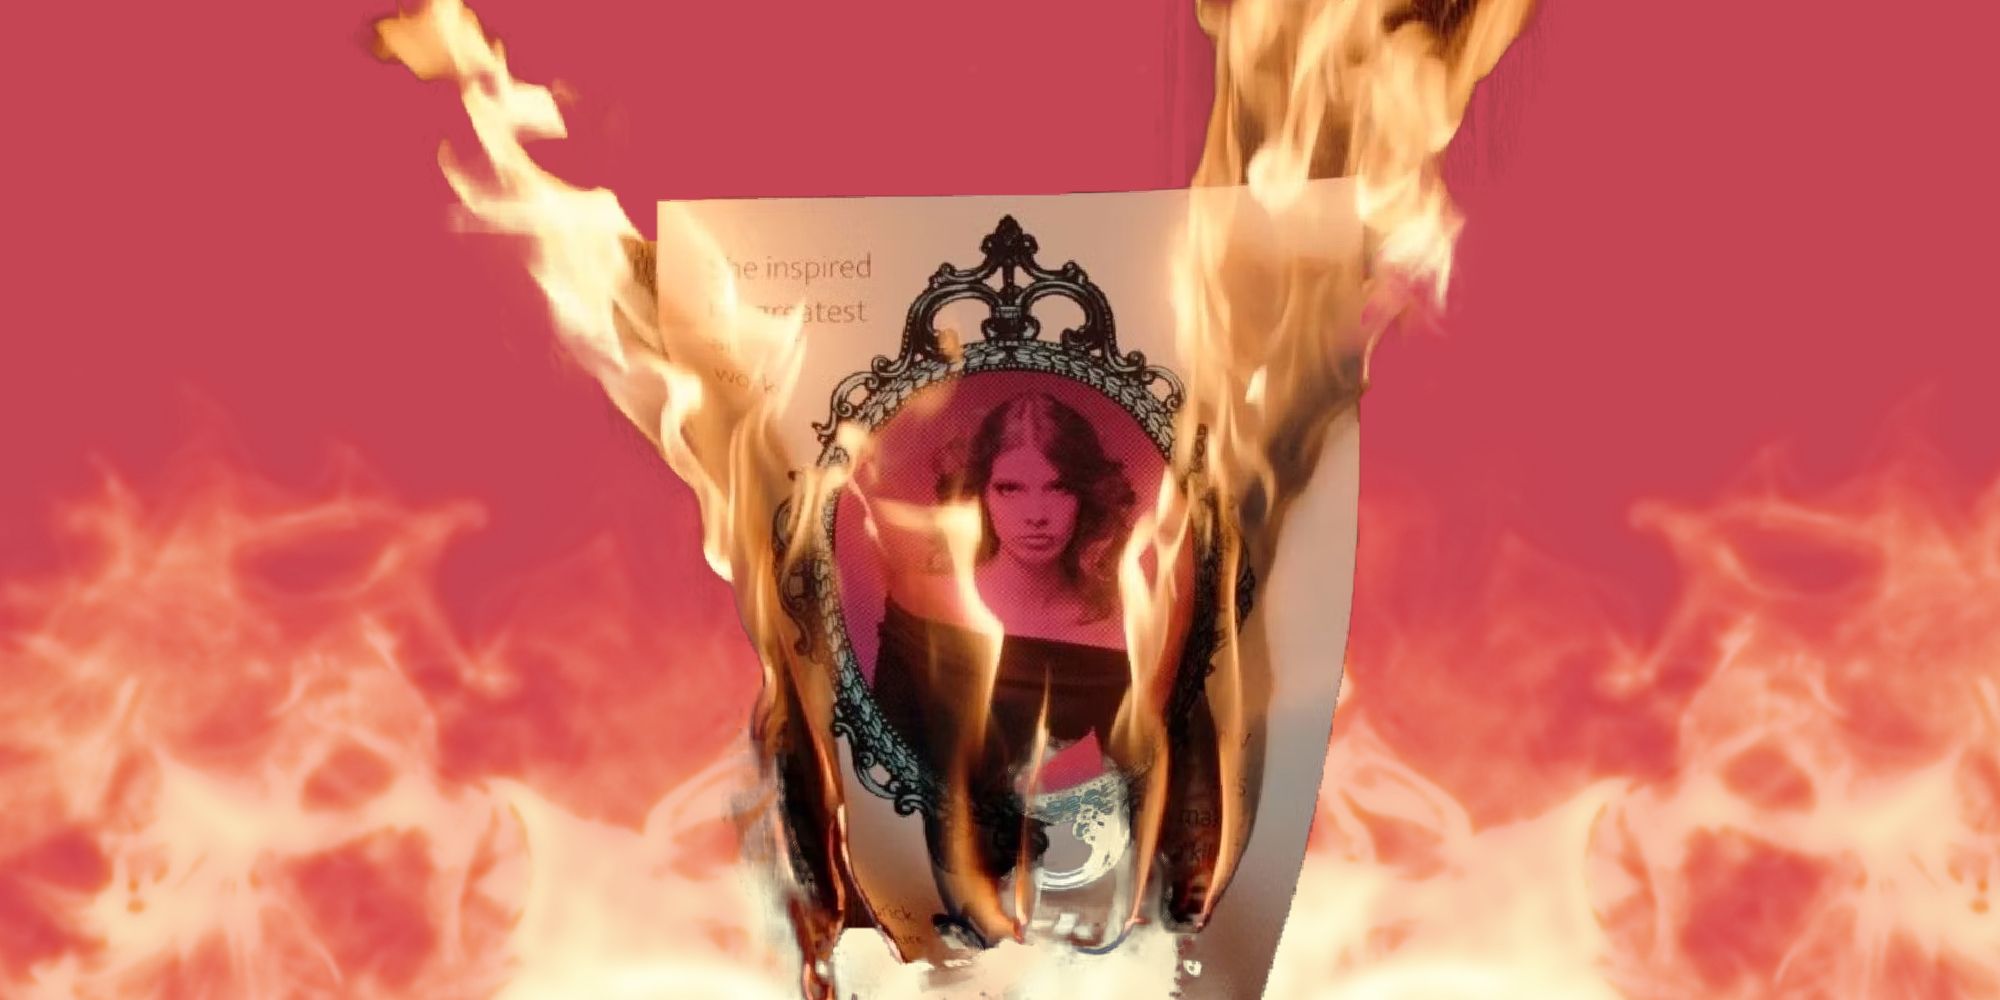 Marissa Marcel from Immortality surrounded by fire.